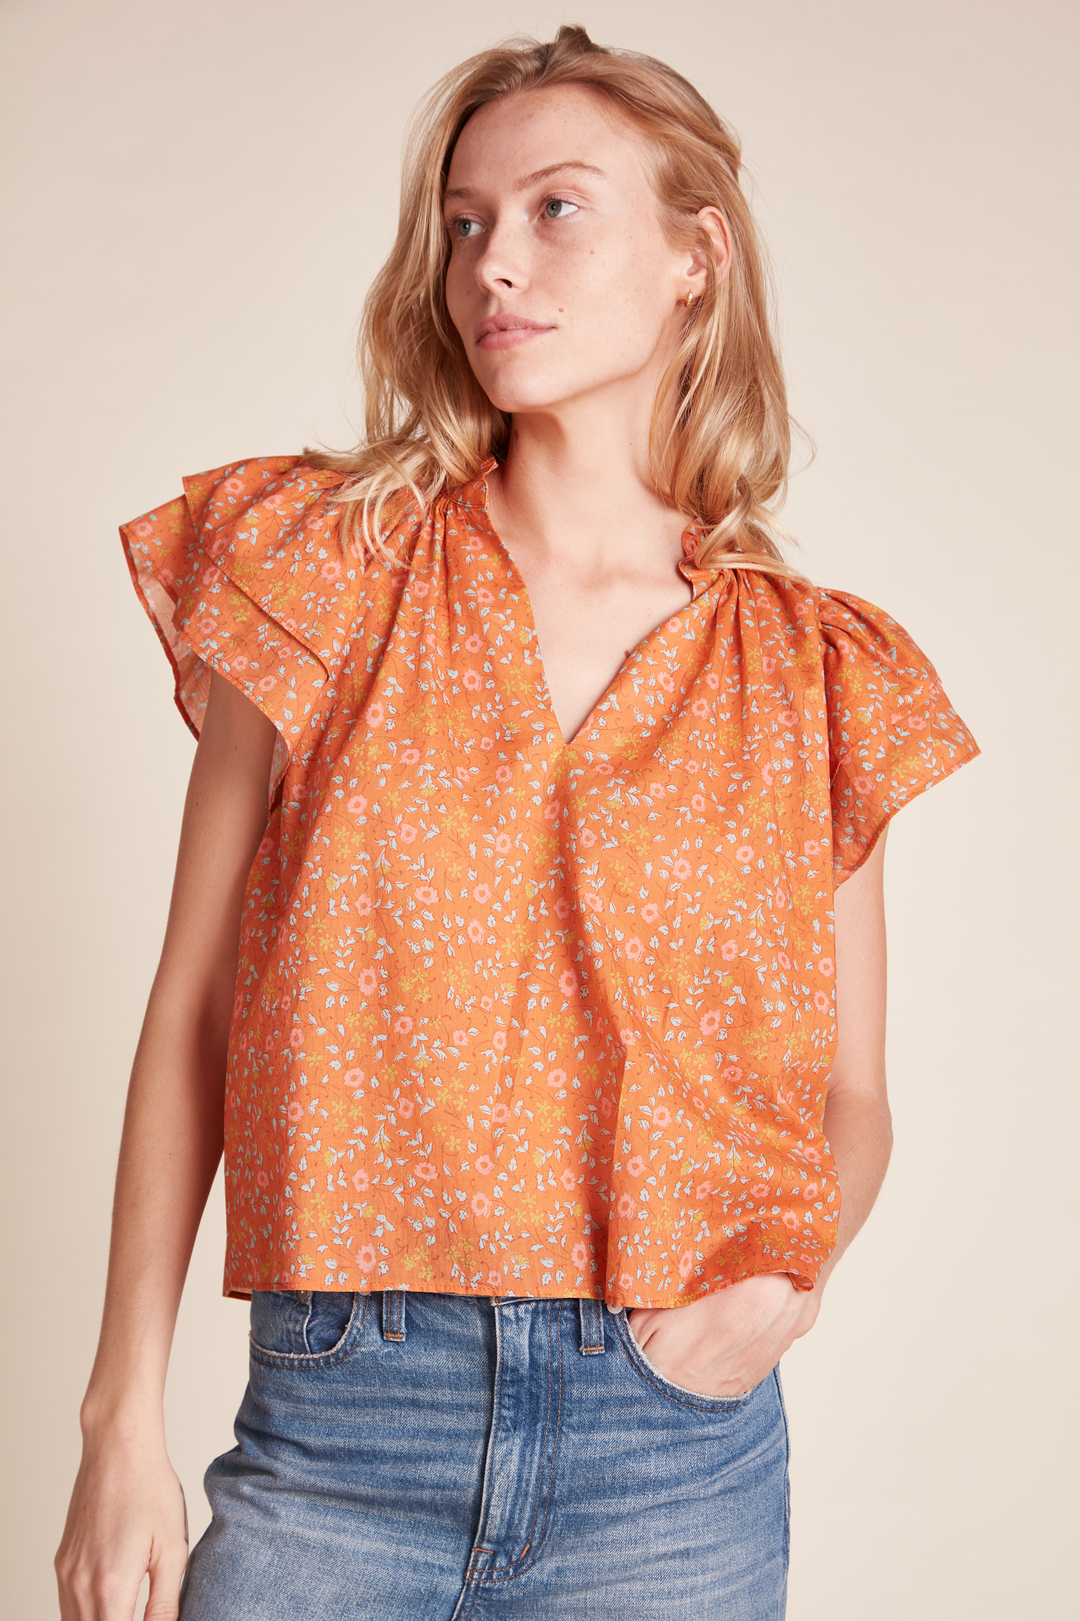 Trovata - Clover Blouse in Turmeric Ivy